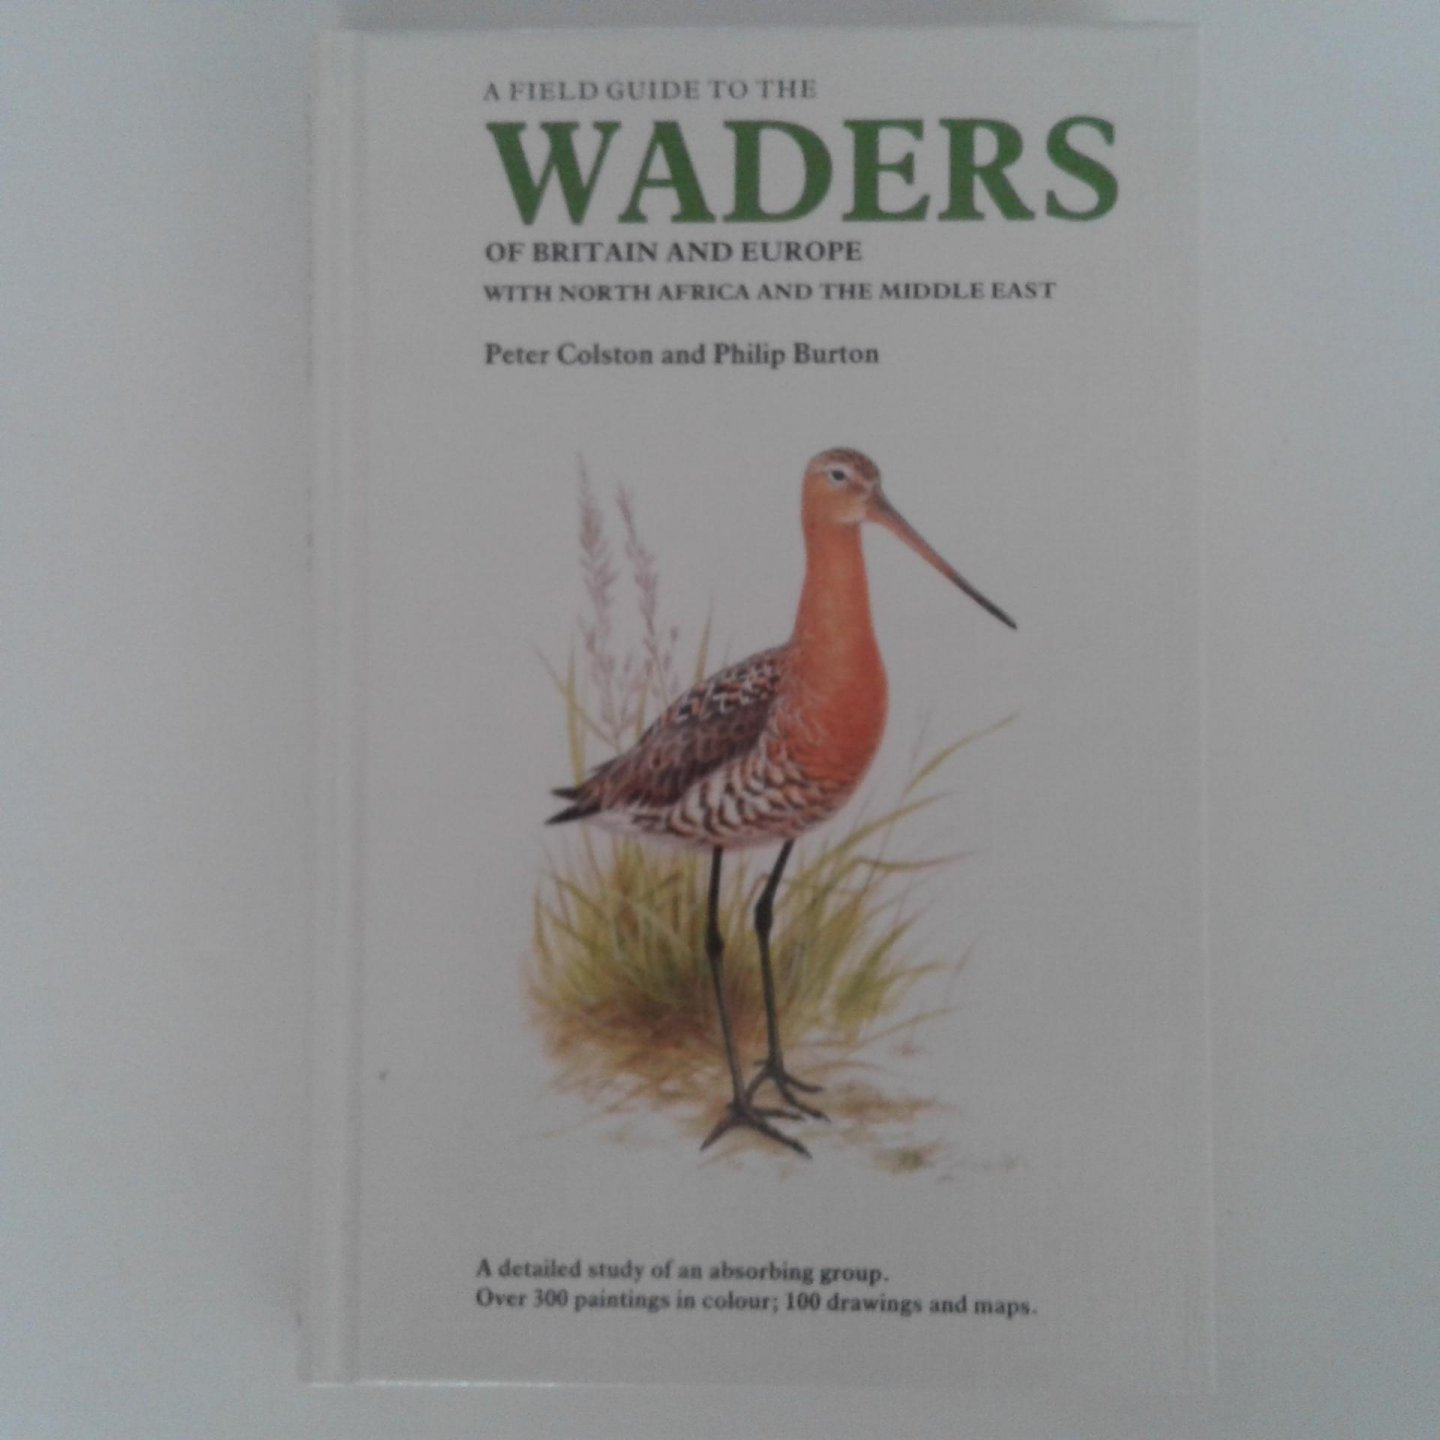 Colston, Peter ; Philip Burton - A Field Guide to the Waders of Britain and Europe ; With North Africa and the Middle east